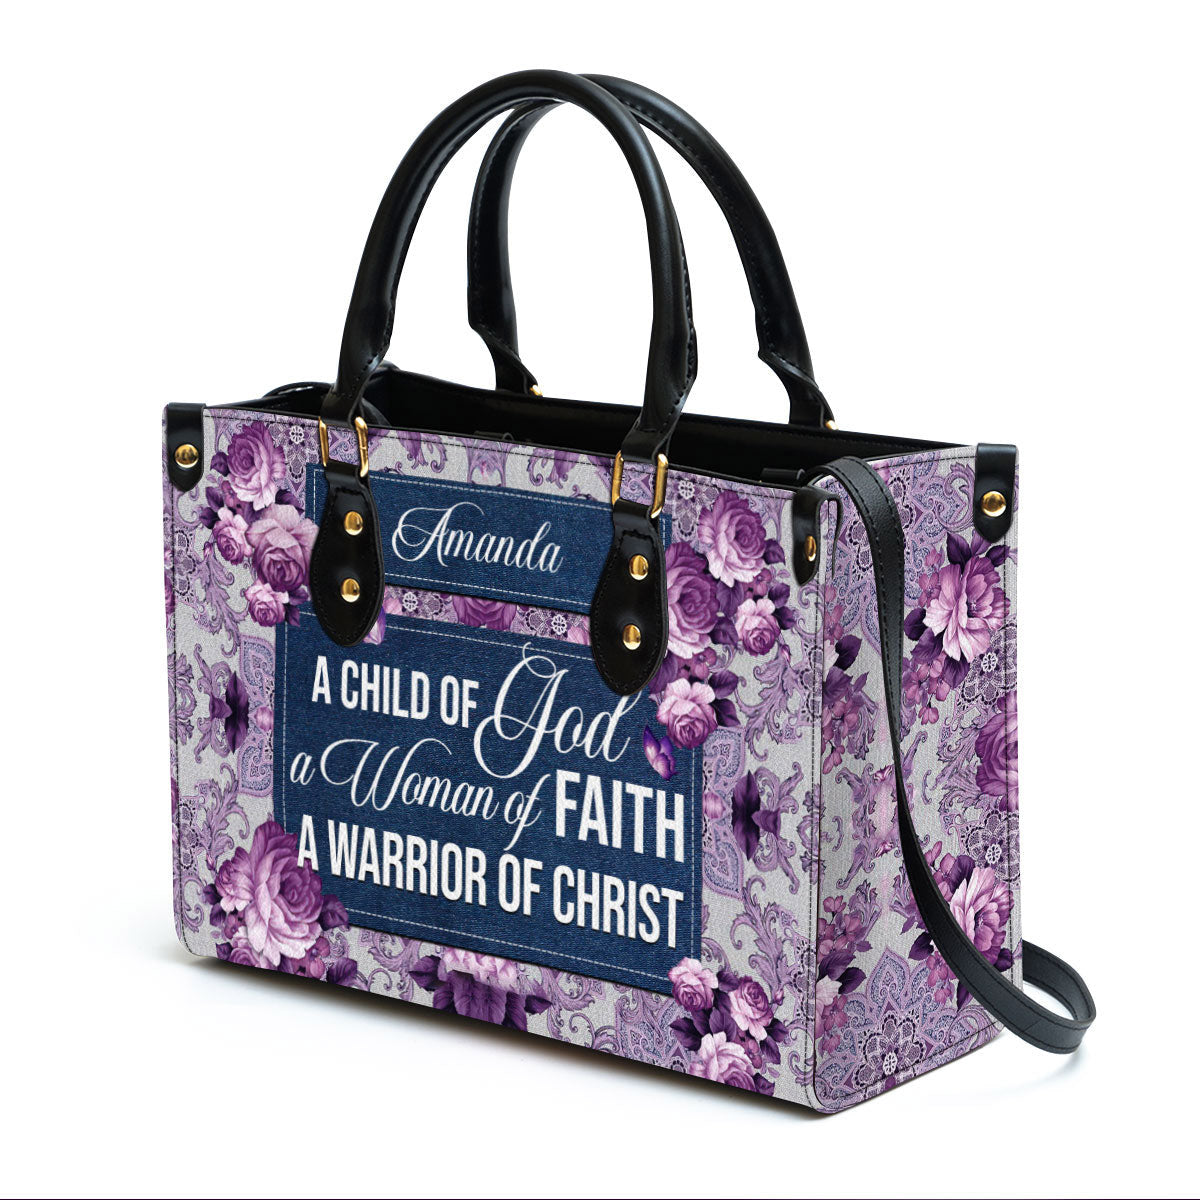 A Child Of God Leather Bag - Personalized Leather Bag With Handle for Christian Women